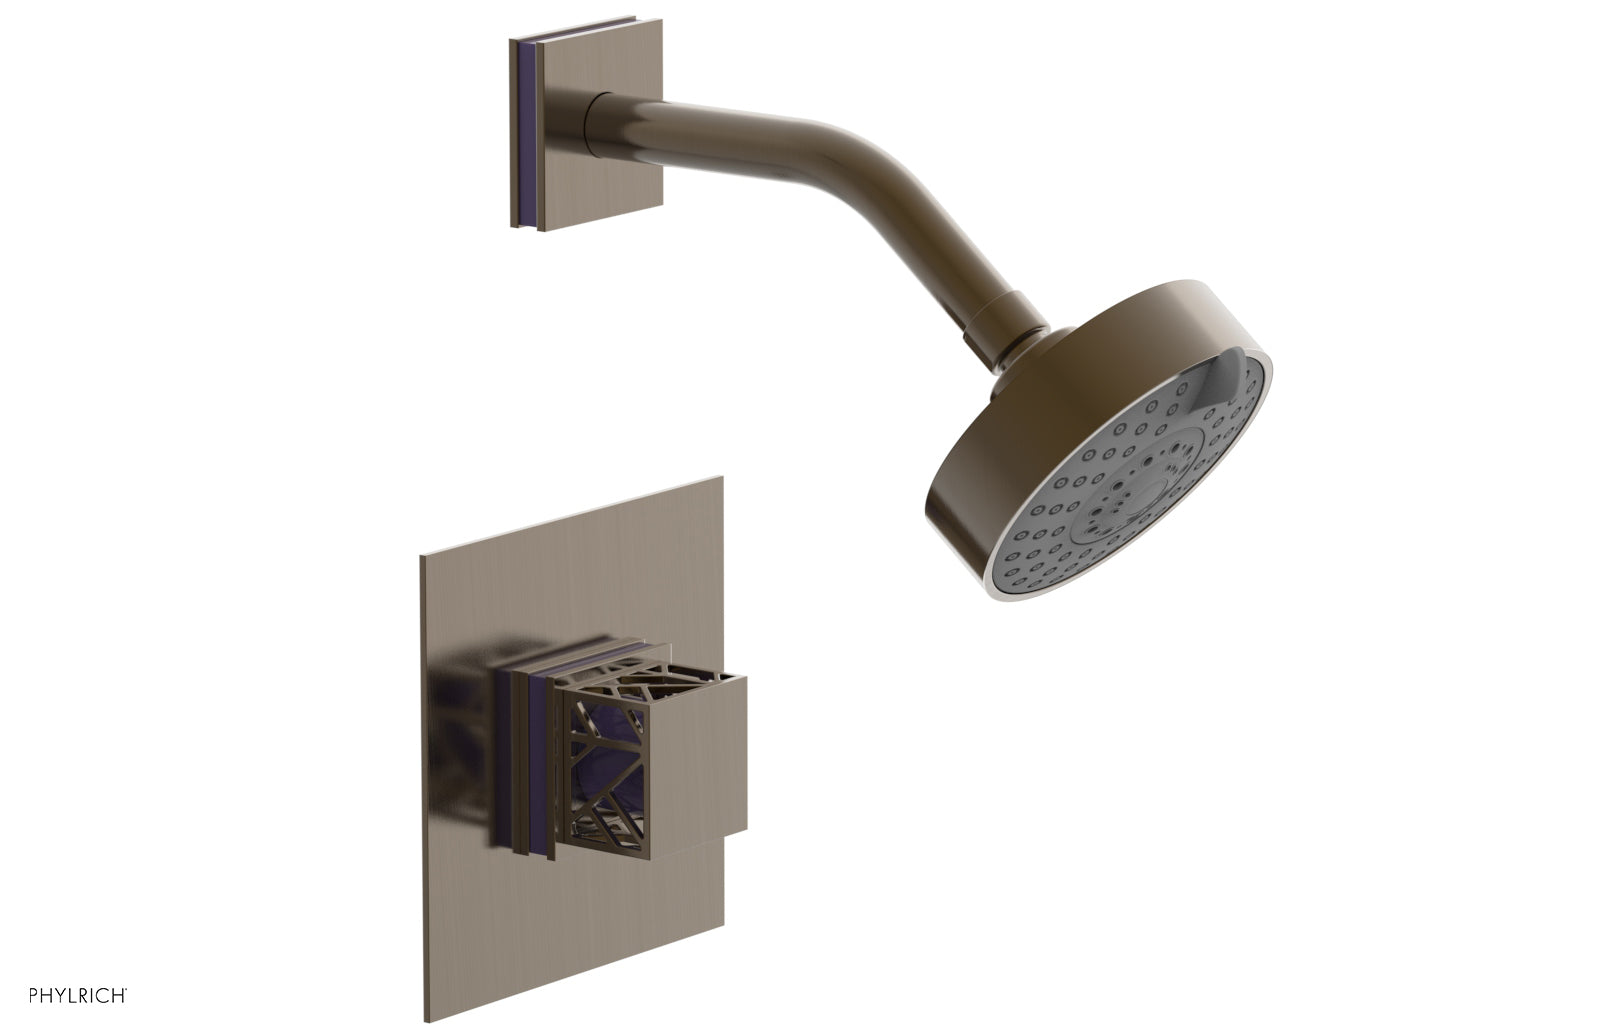 Phylrich JOLIE Pressure Balance Shower Set - Square Handle with "Purple" Accents